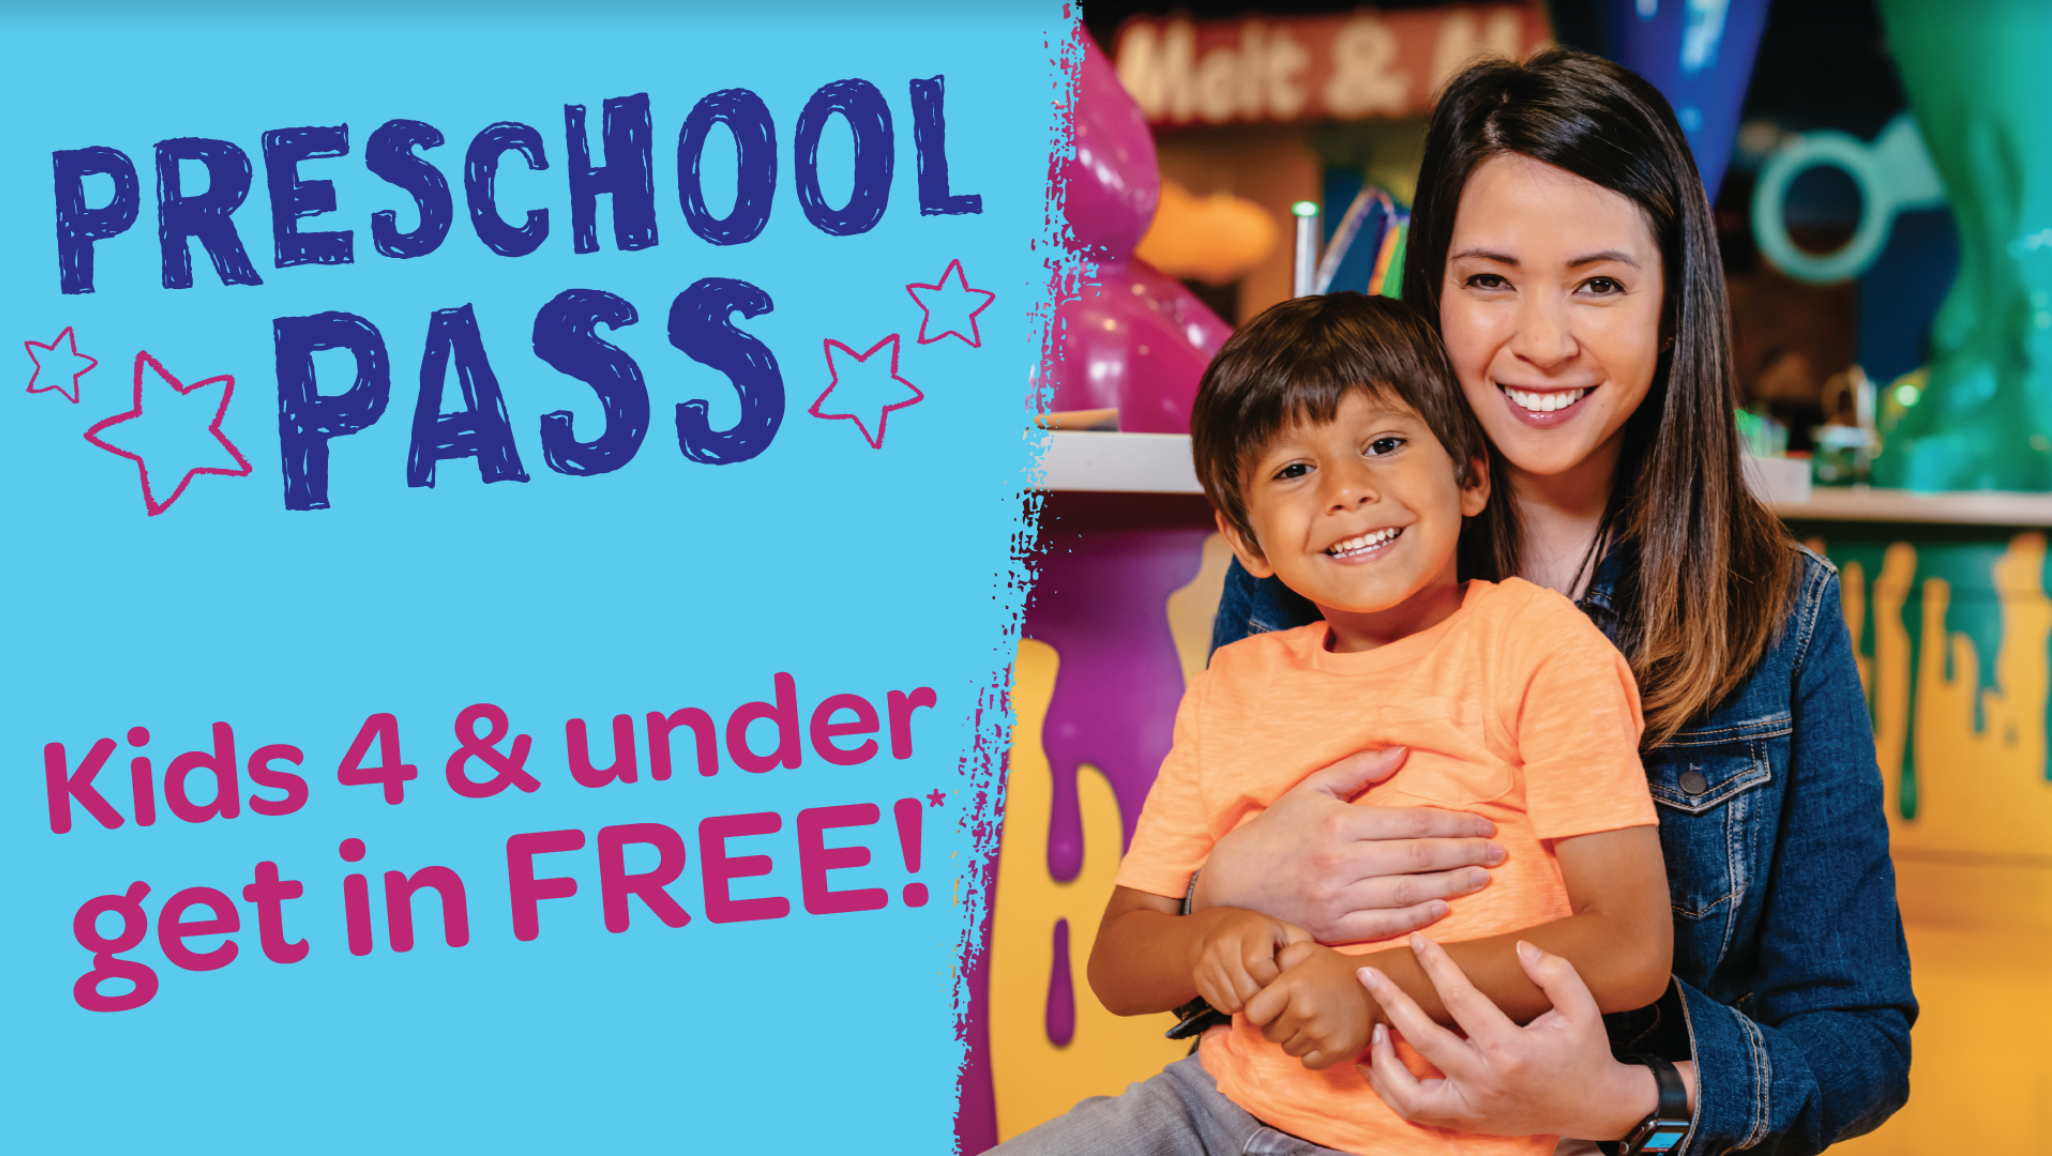 Crayola Experience Preschool Pass: graphic with mom and son showing that kids 4 and under get in FREE